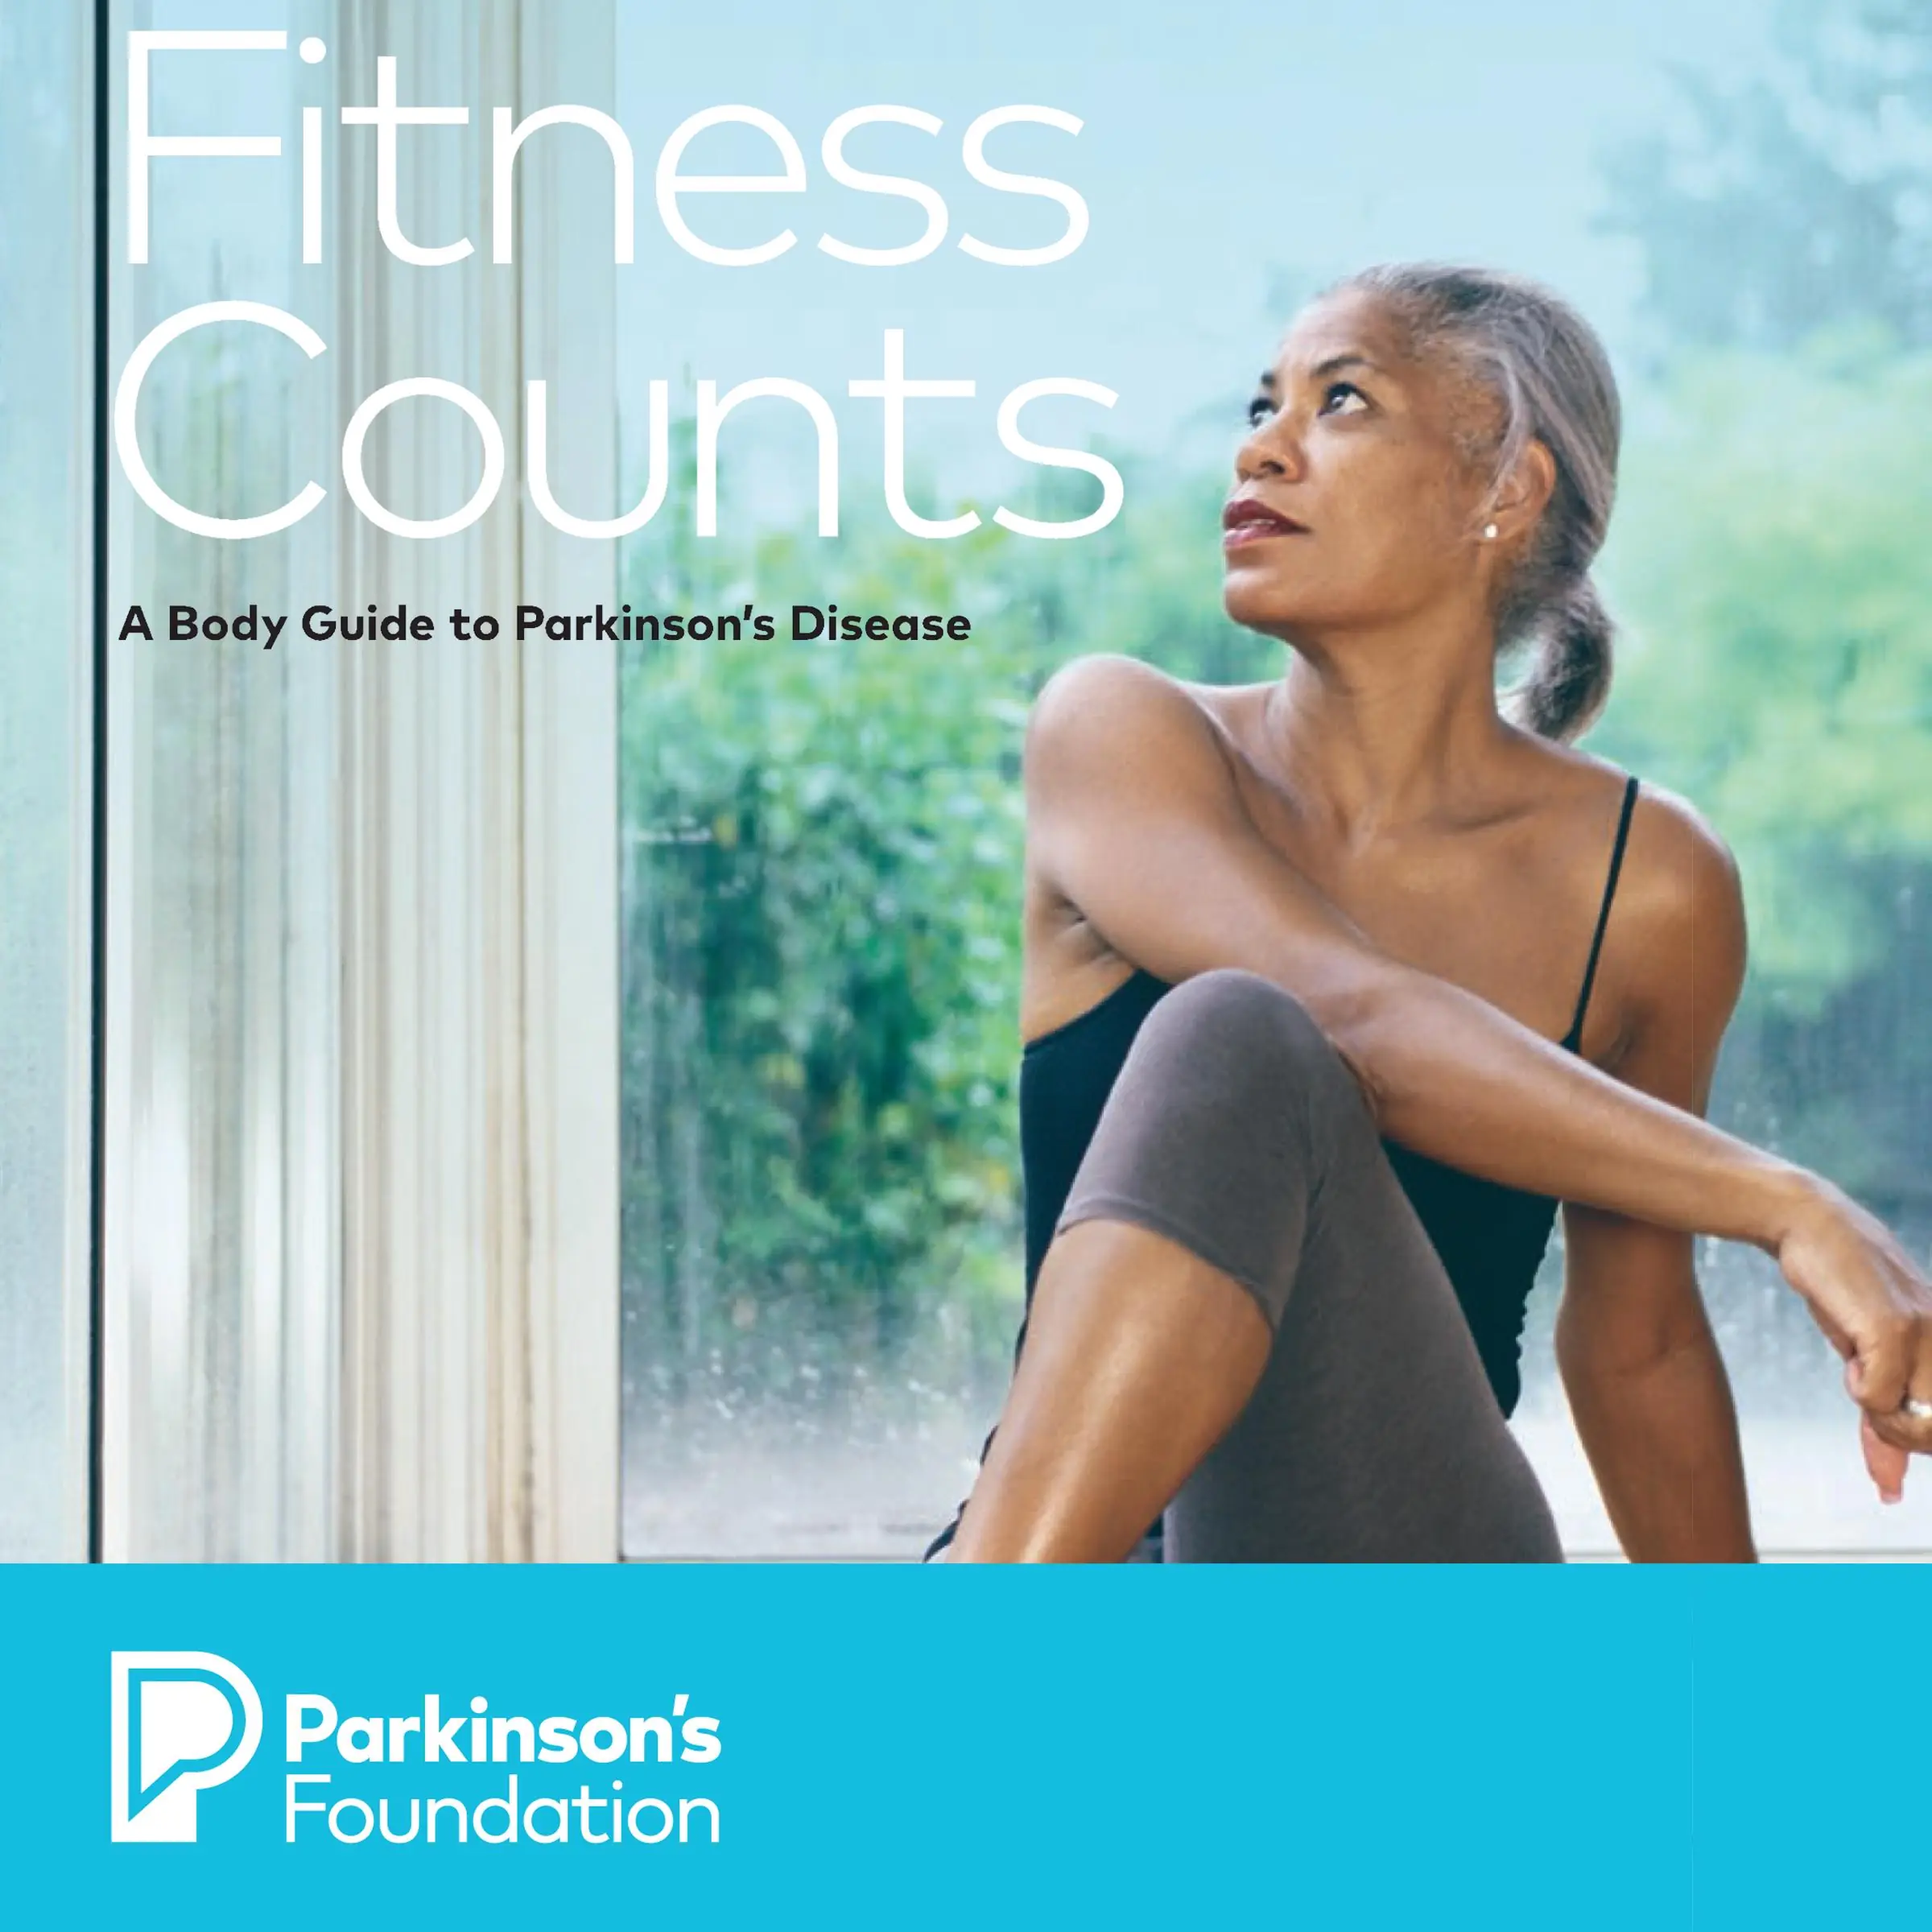 Fitness Counts: A Body Guide to Parkinson's Disease by Parkinsons Foundation